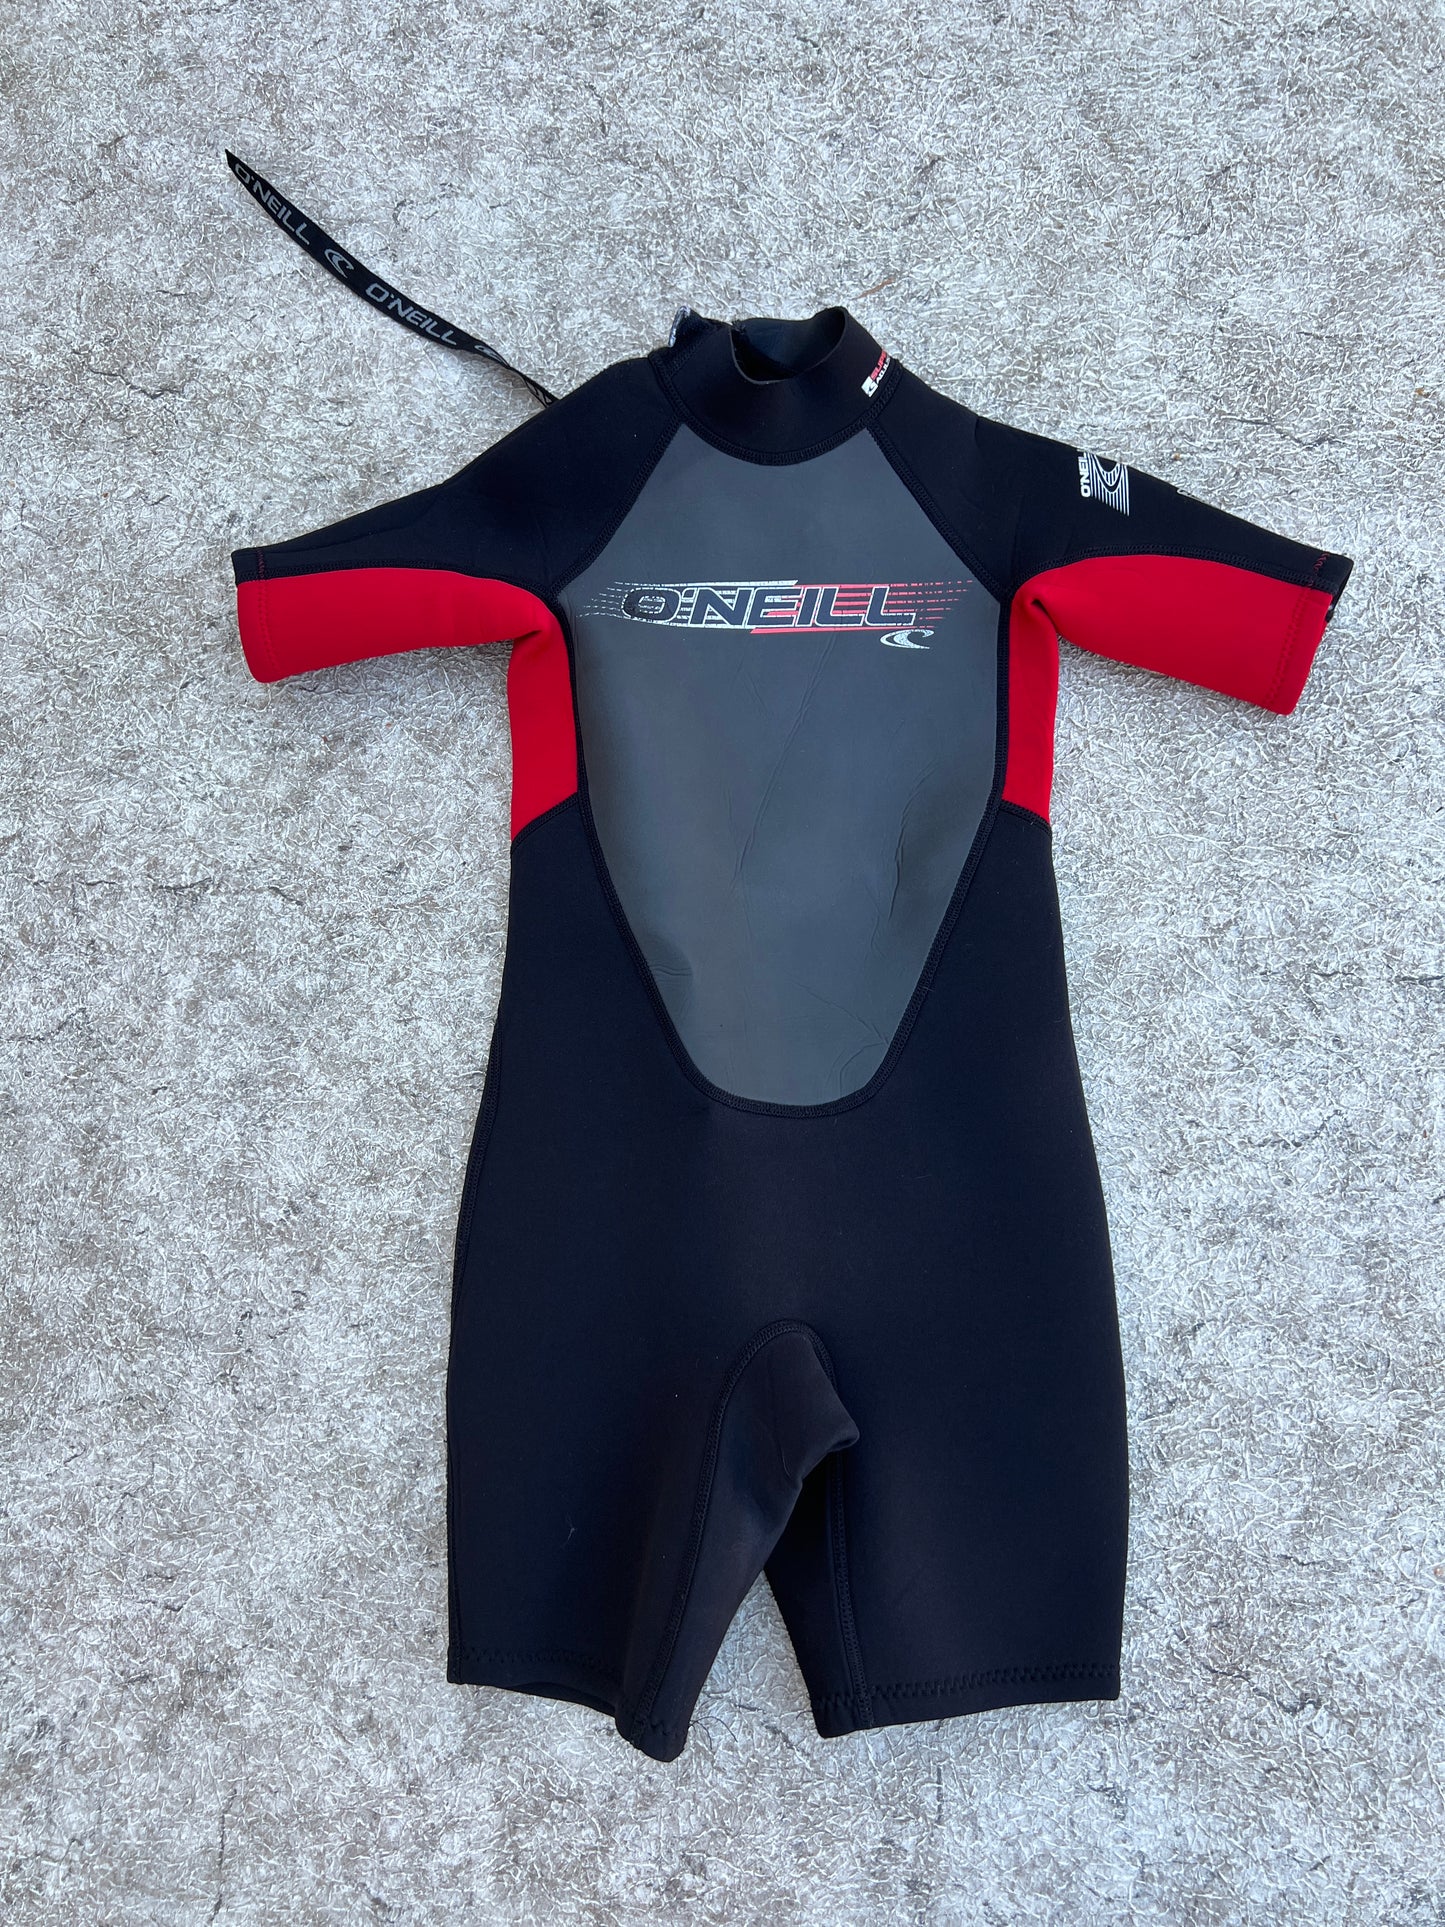 Wetsuit Child Size 6 2-3mm O'neil Black Red Excellent